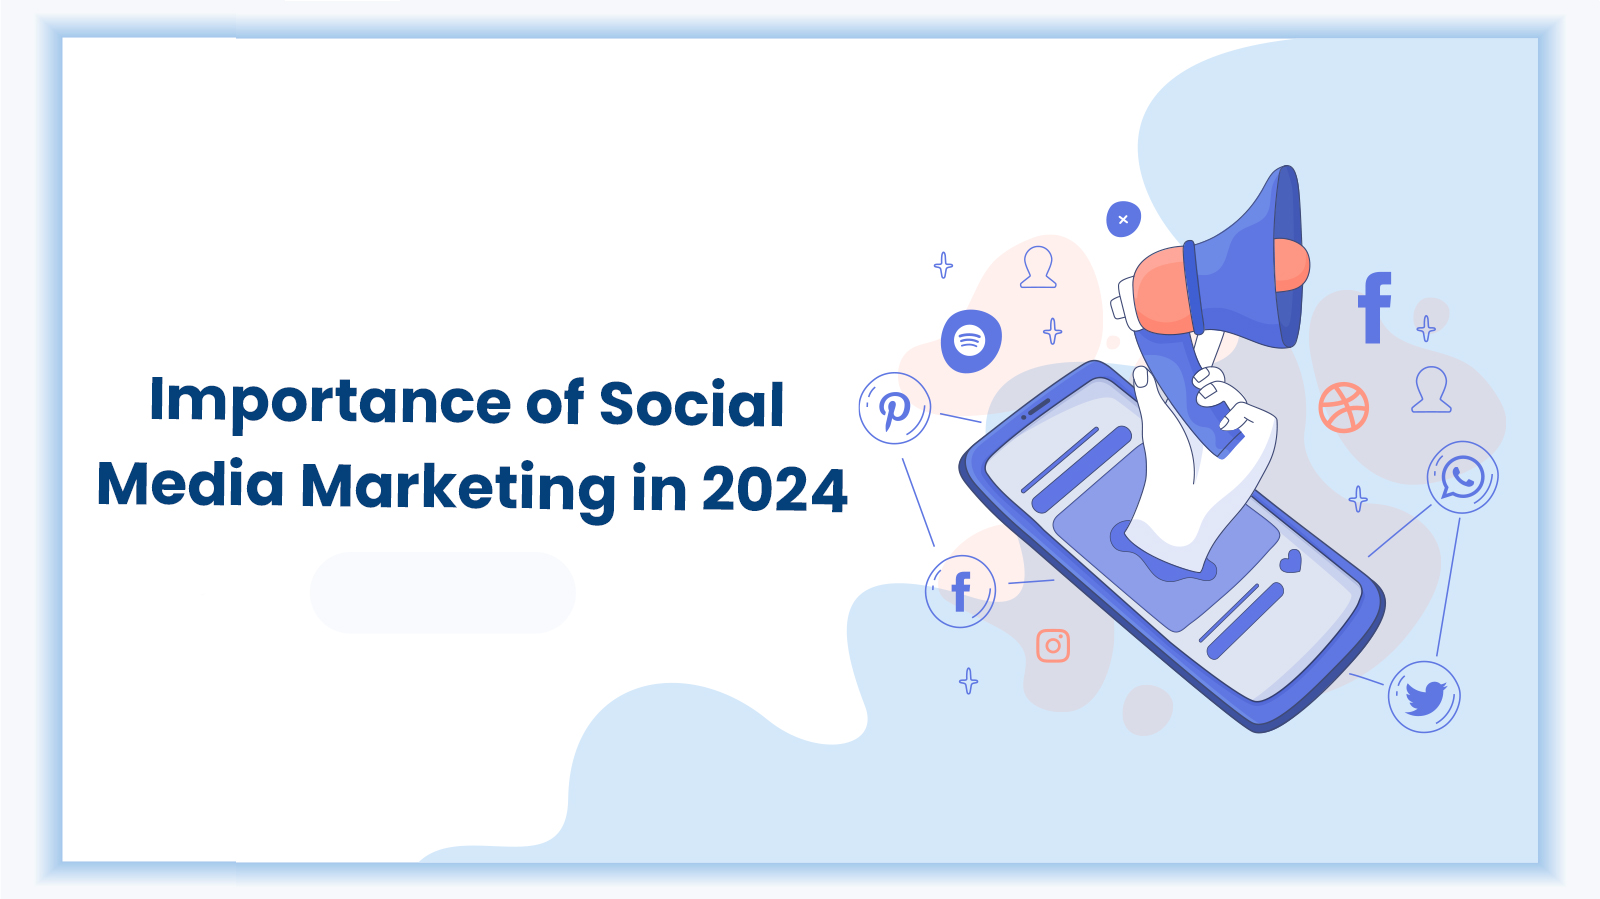 Feature image for the blog - Importance of Social Media marketing in 2024